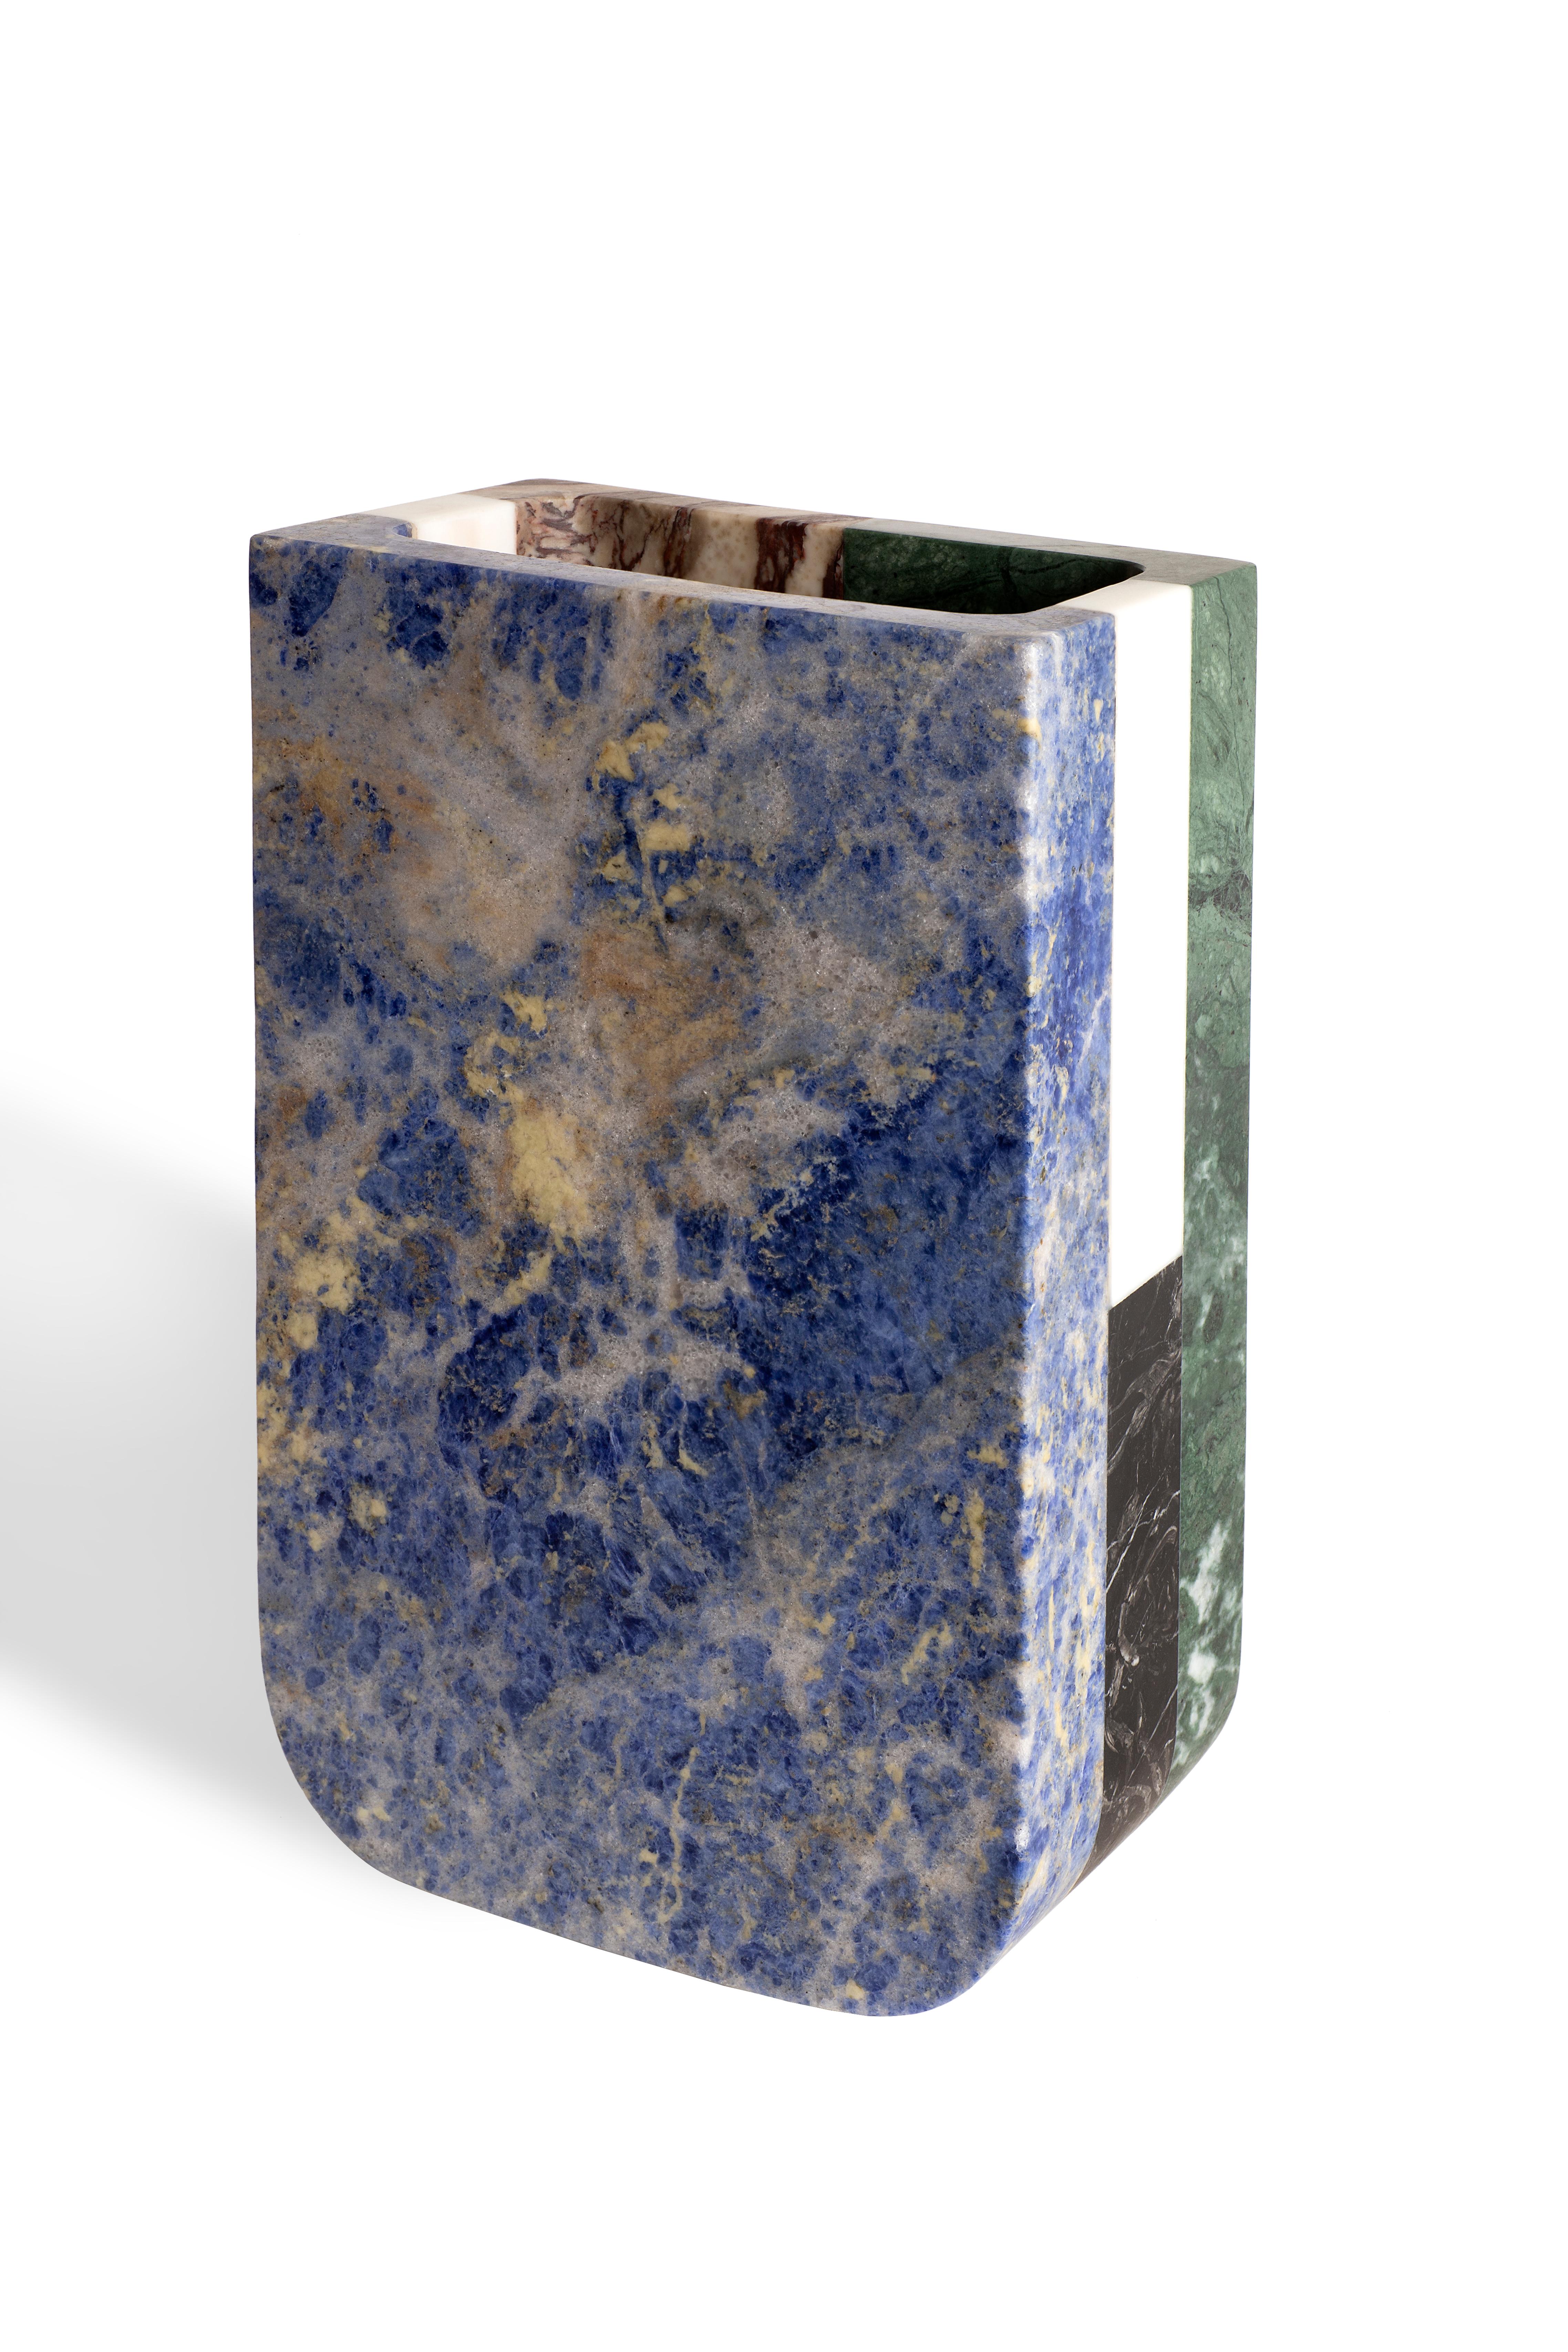 Vase in Black Marquinia, White Michelangelo, Arabescato Vagli Filo Rosso, Green Guatemala and Blu Sodalite marbles.
Size: 20 x 12 x 32 cm, 7.9 x 4.7 x 12.6 in, smooth finishing. Commercial name: Piero, Masters Collection by the Austrian designer